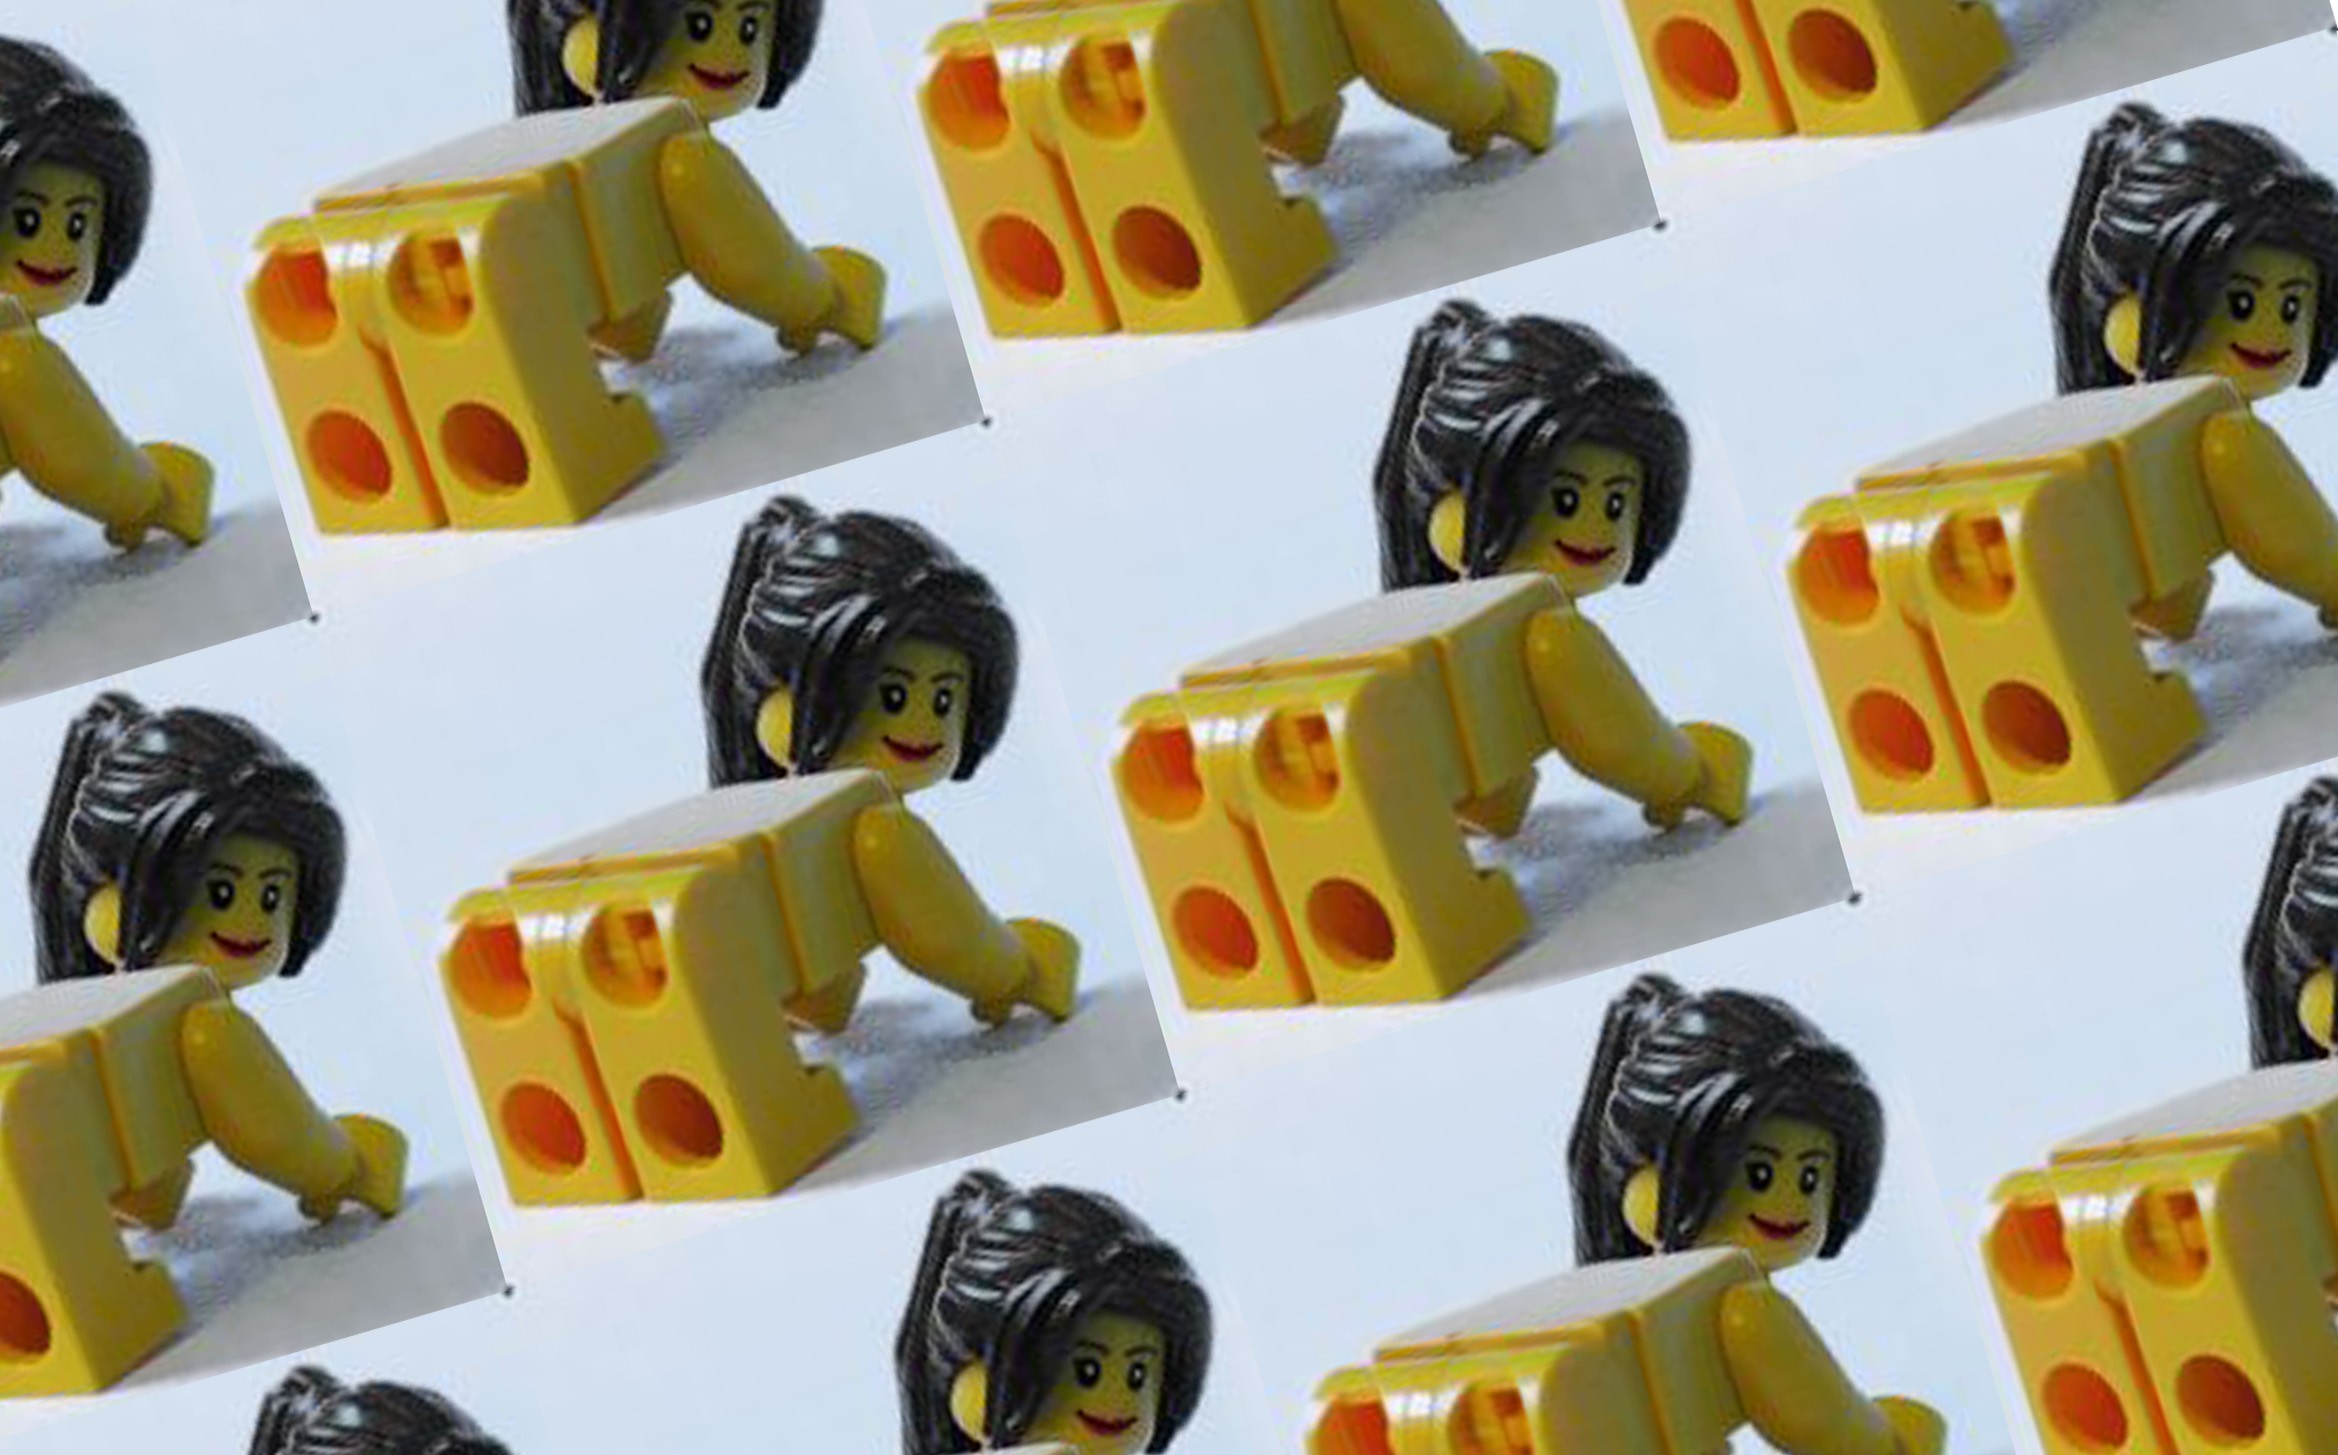 Lego Harry Potter Porn - Analyzing Lego Porn, the Fetish That Will Ruin Your Childhood